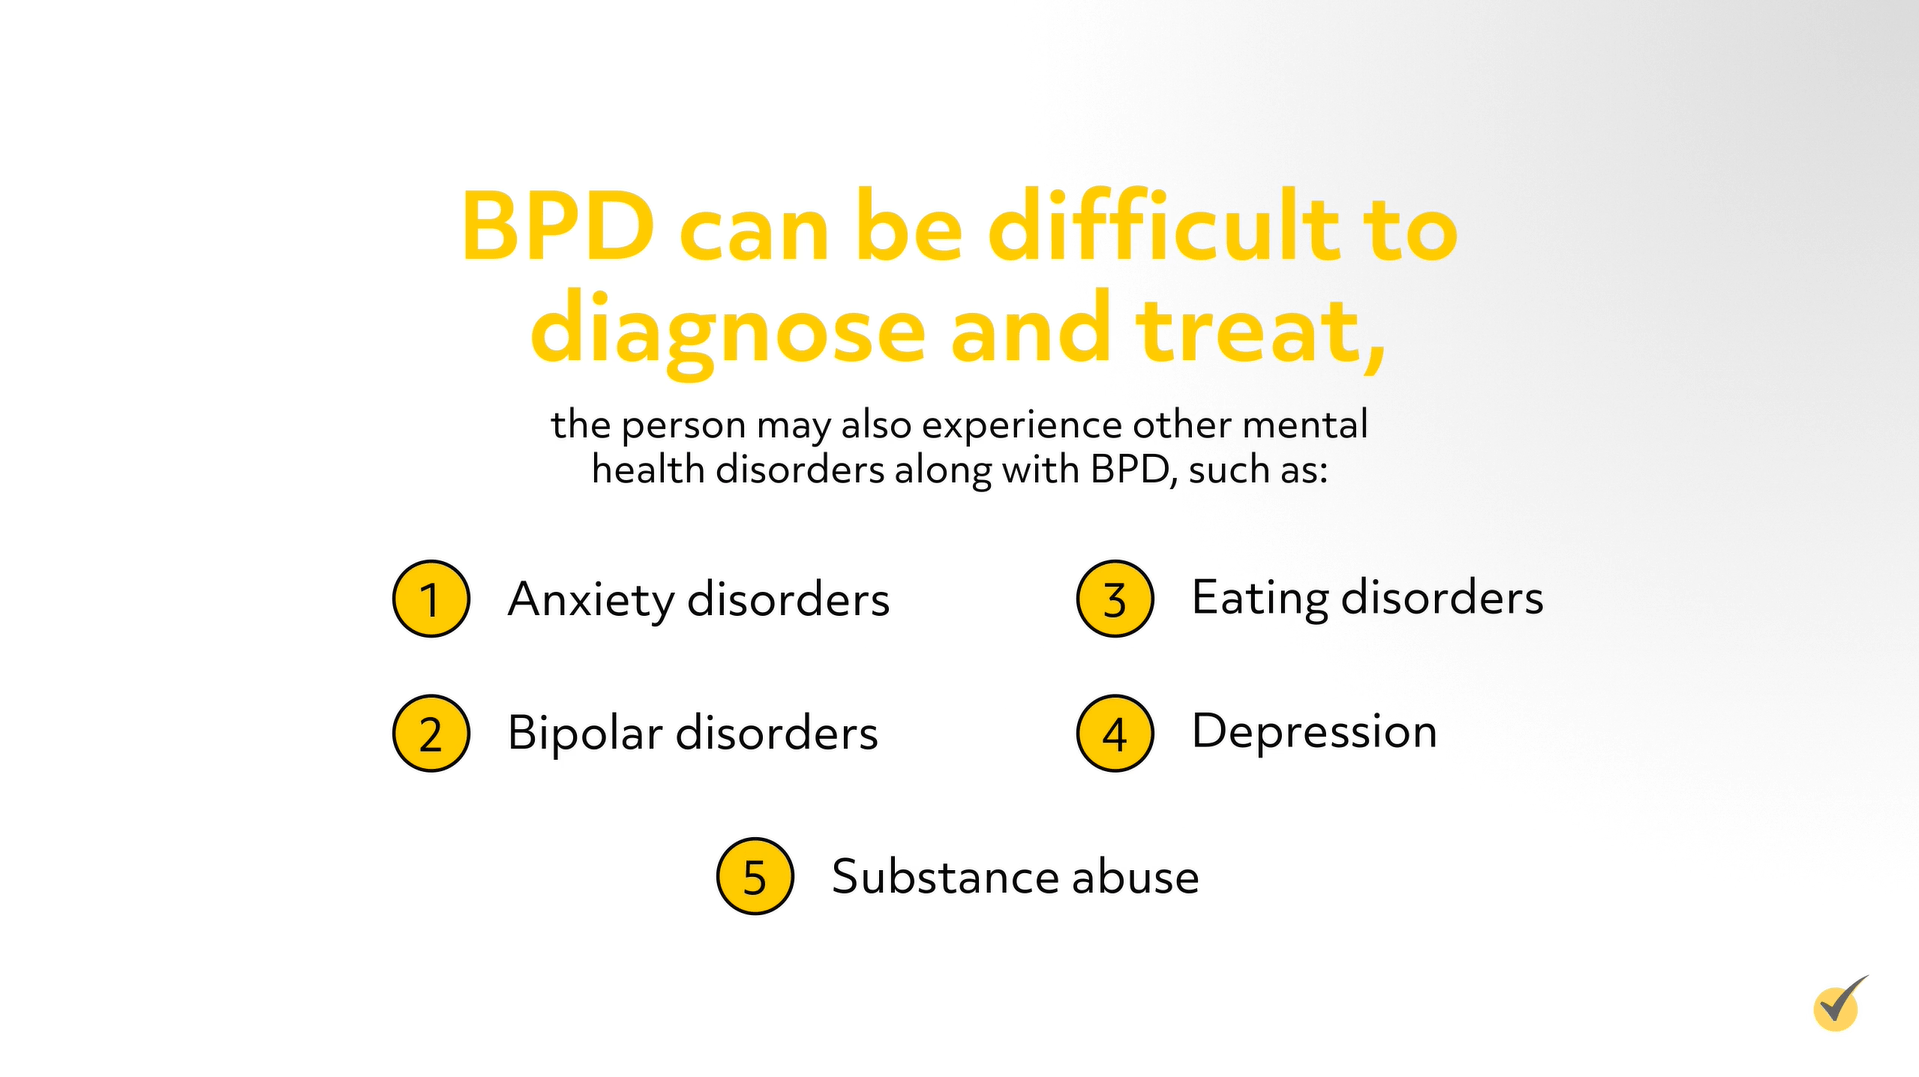 mental health disorders that may occur with BPD